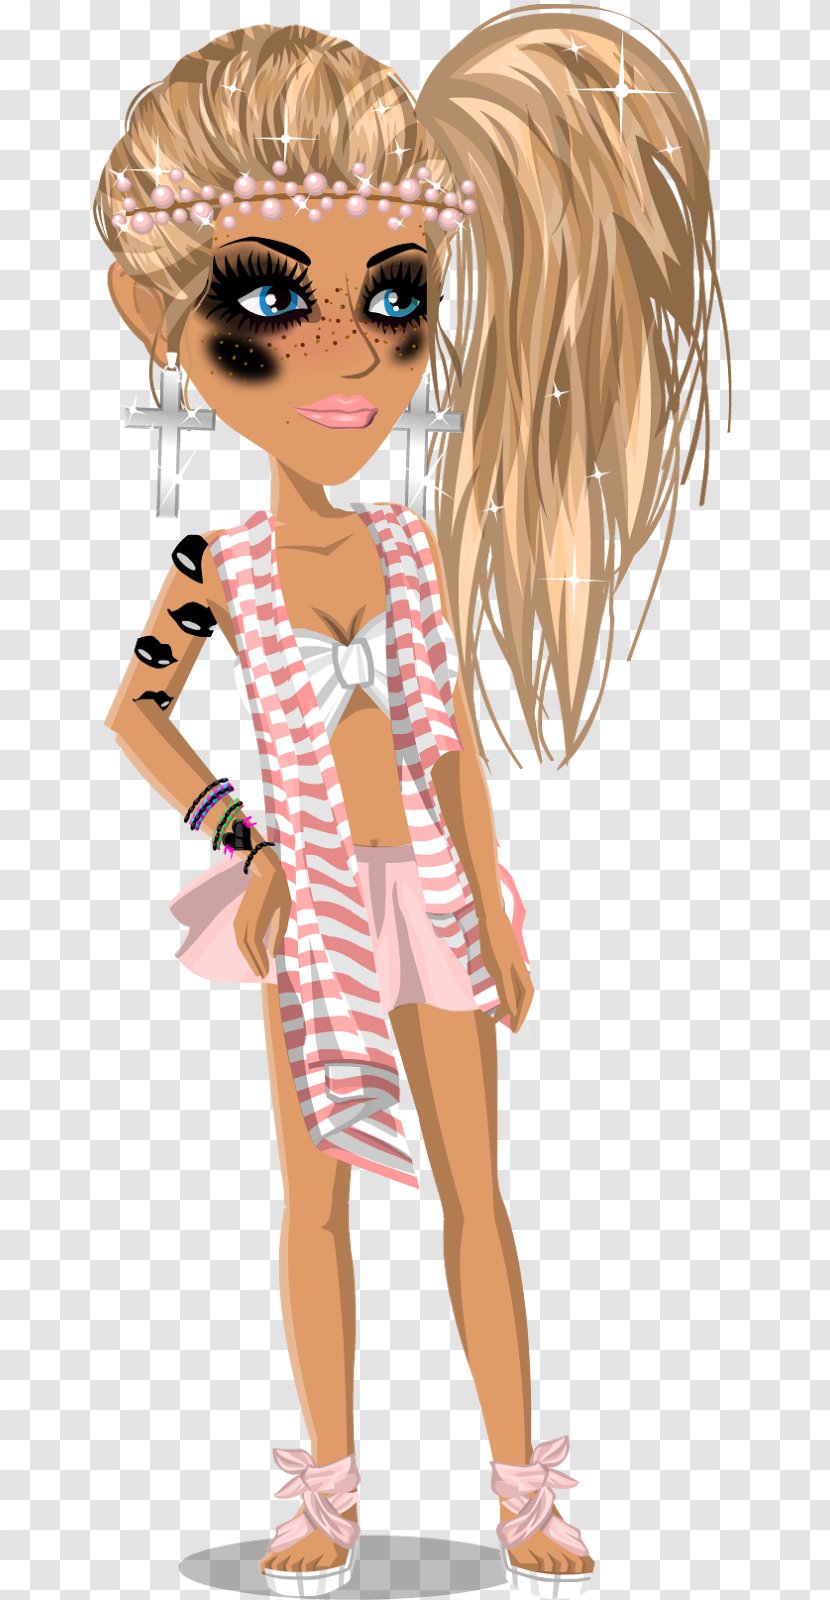 MovieStarPlanet Game Android Avatar Google Images - Frame Transparent PNG